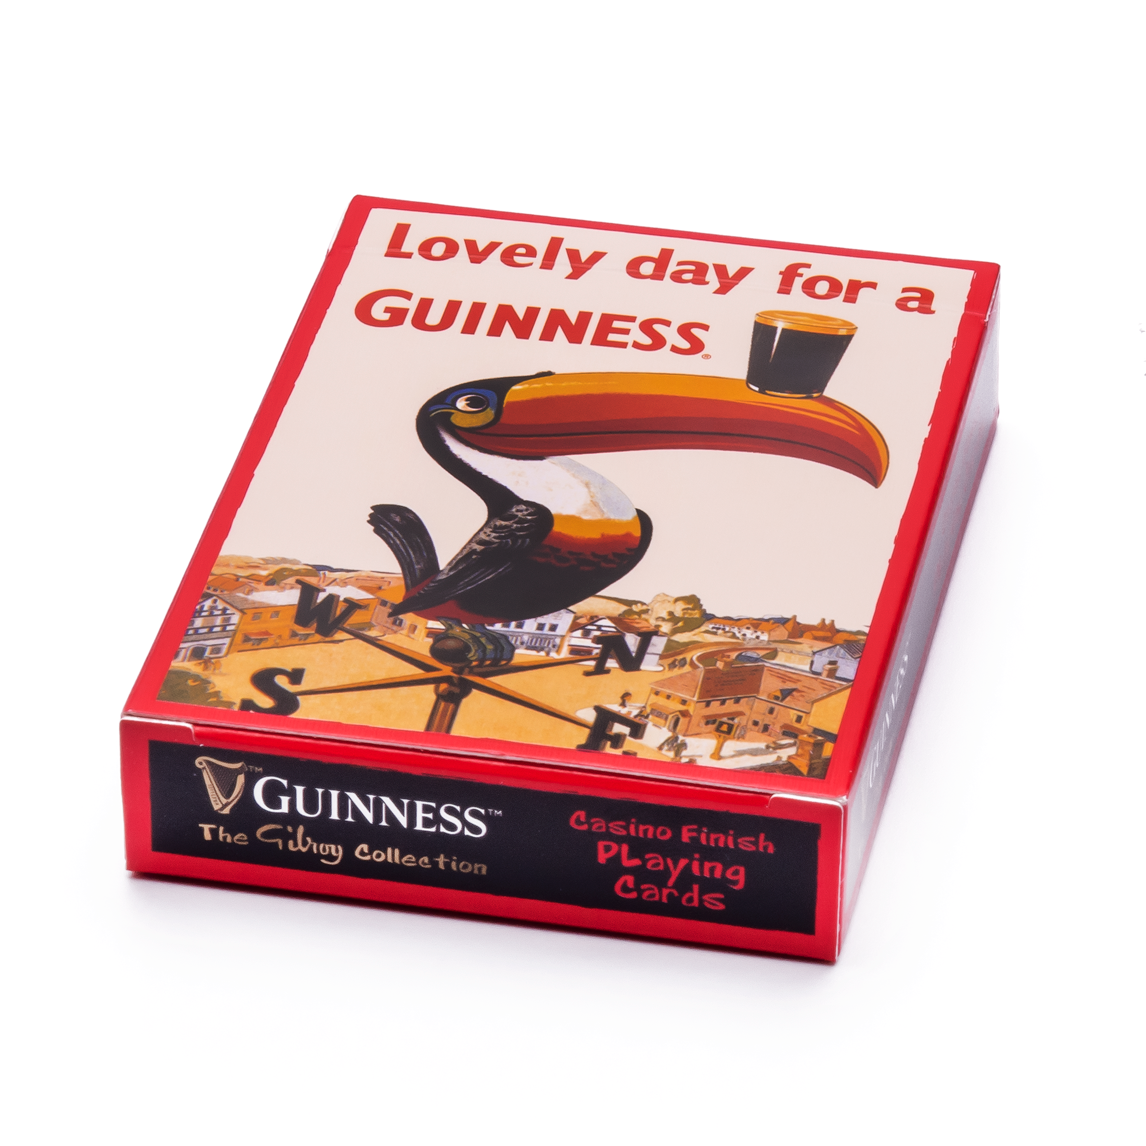 A box of Guinness Toucan Playing Cards featuring Gilroy the Toucan on a white background.